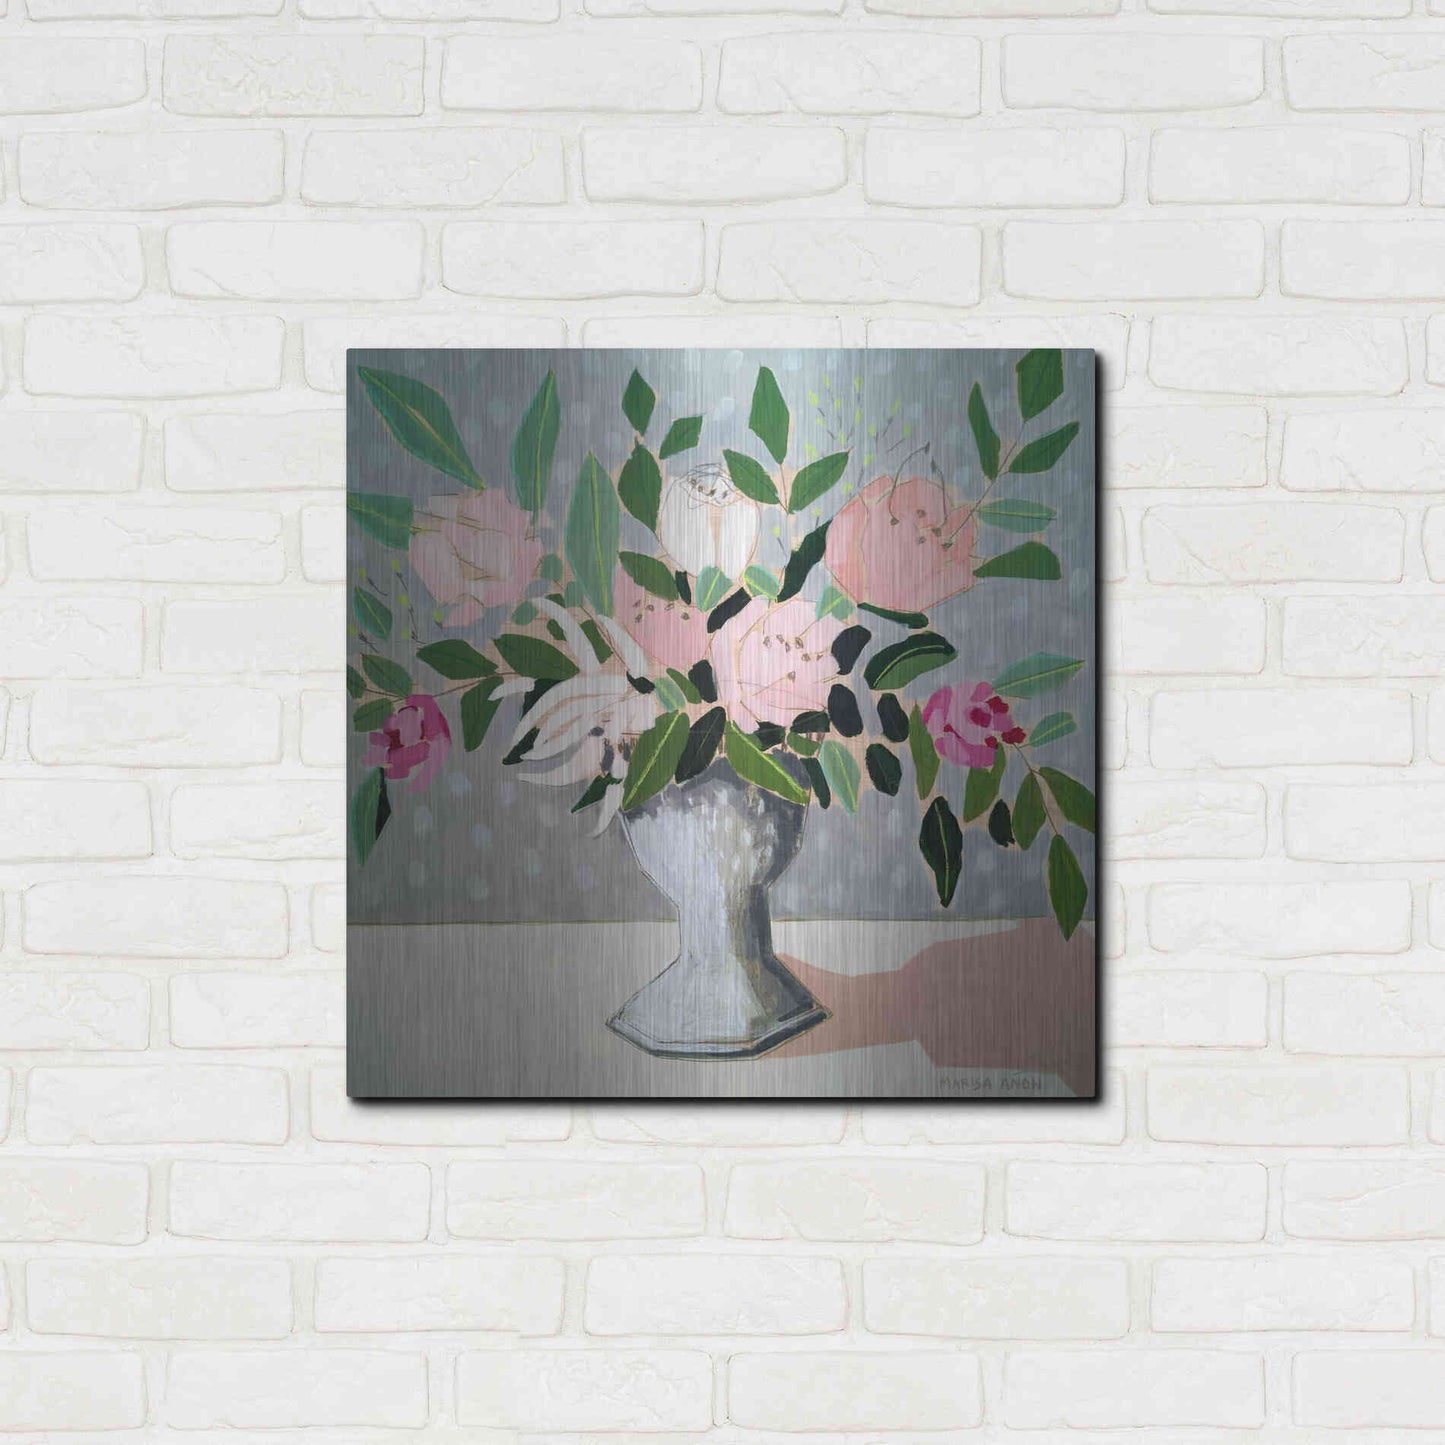 Luxe Metal Art 'Spring Florals 1' by Marisa Anon, Metal Wall Art,24x24